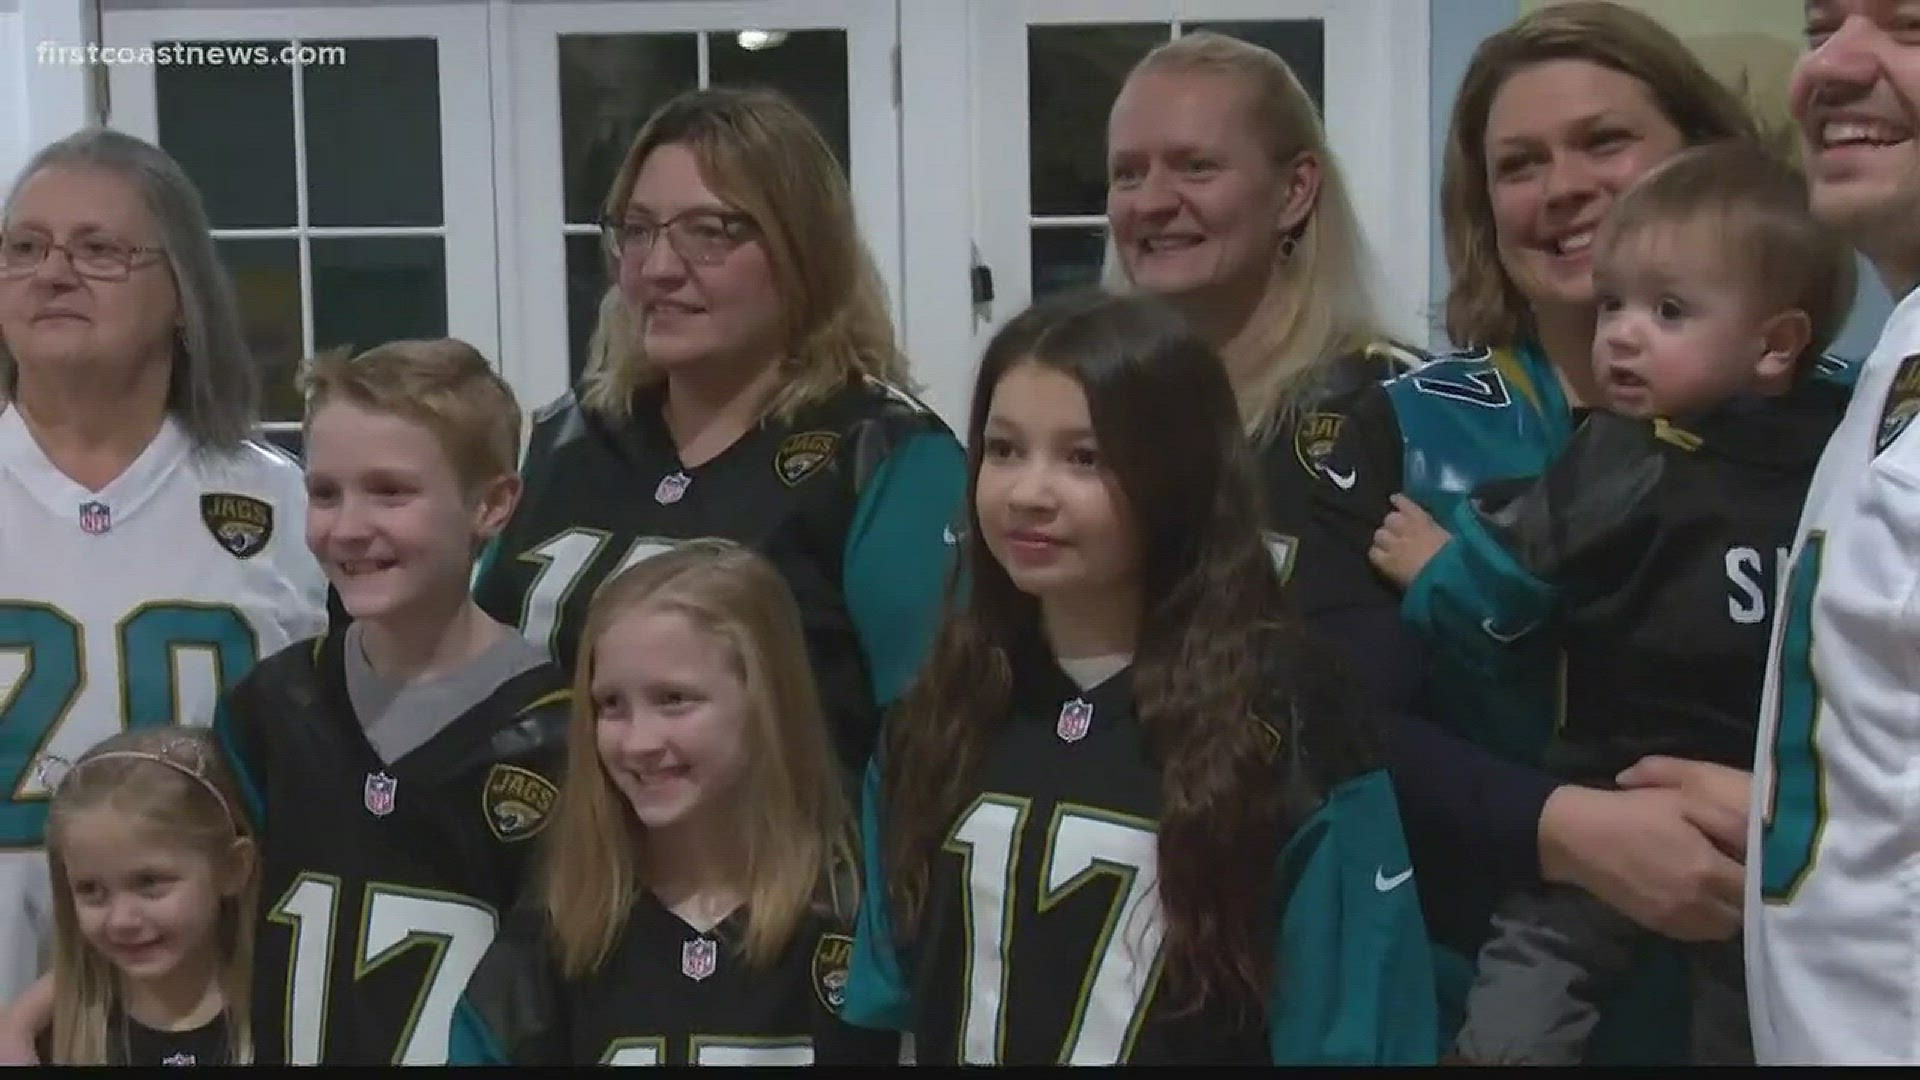 The family says they had the jerseys custom made in honor of their father, who was a big Jaguars fan.